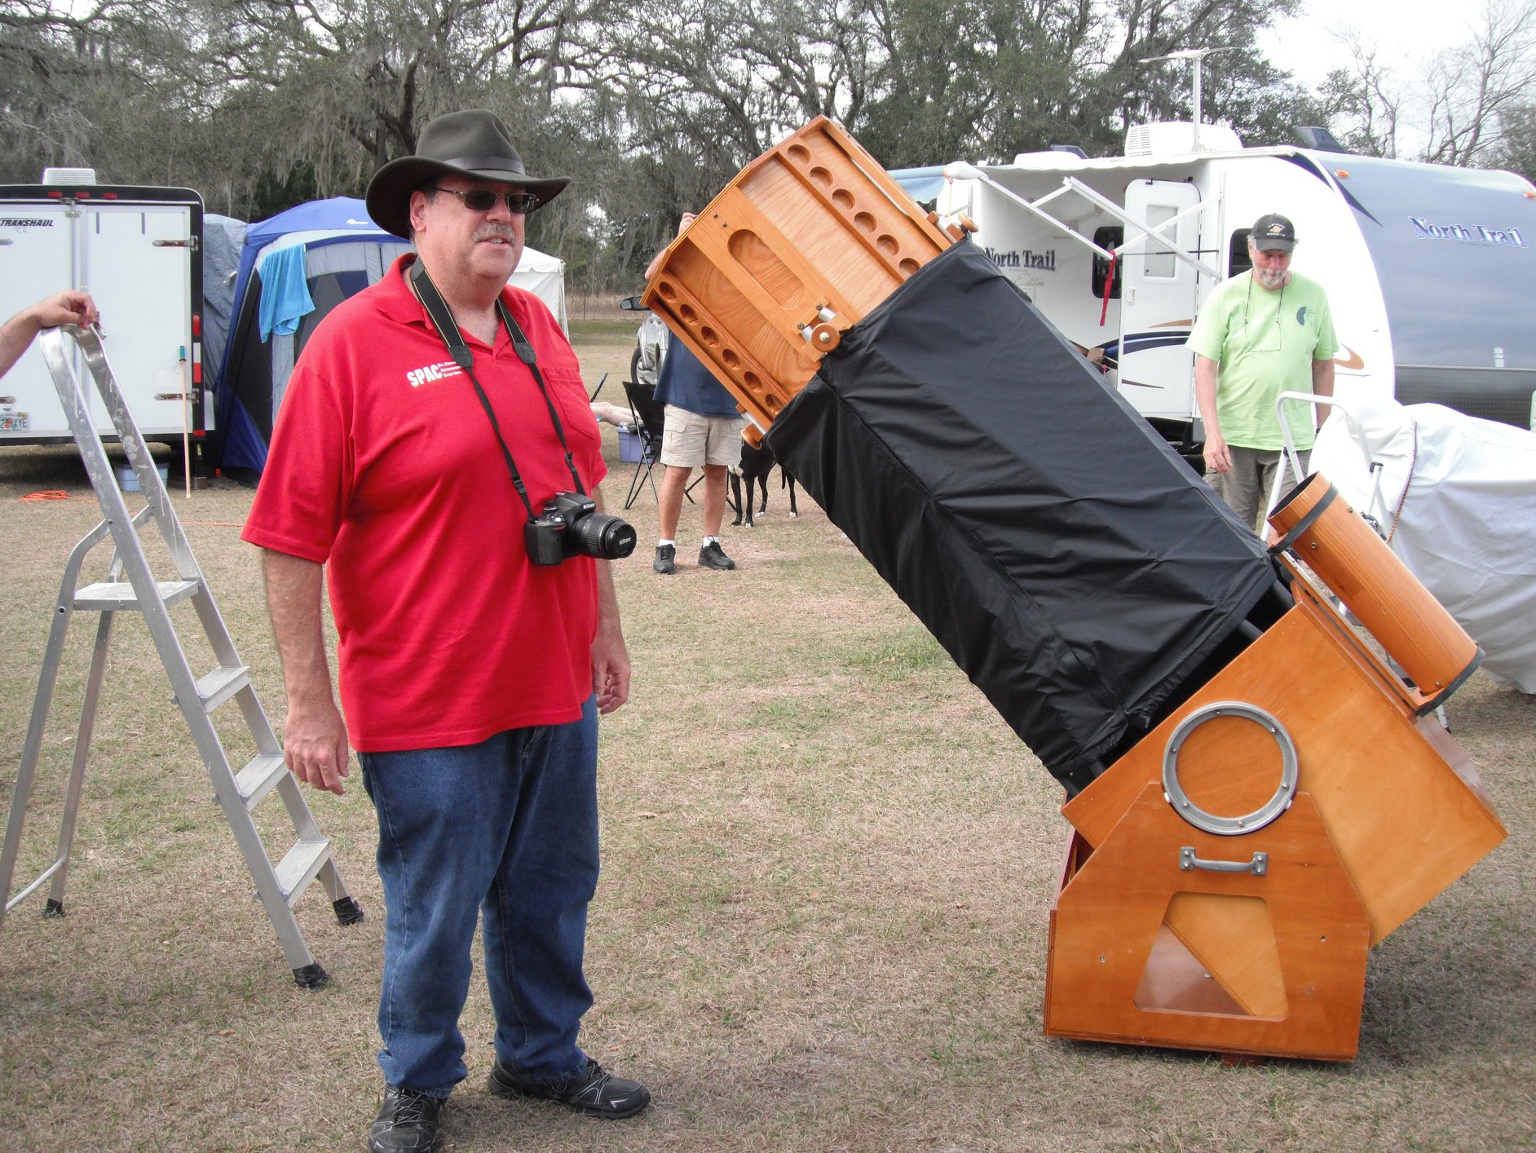 Me at the 2019 Orange Blossom Special Star Party.